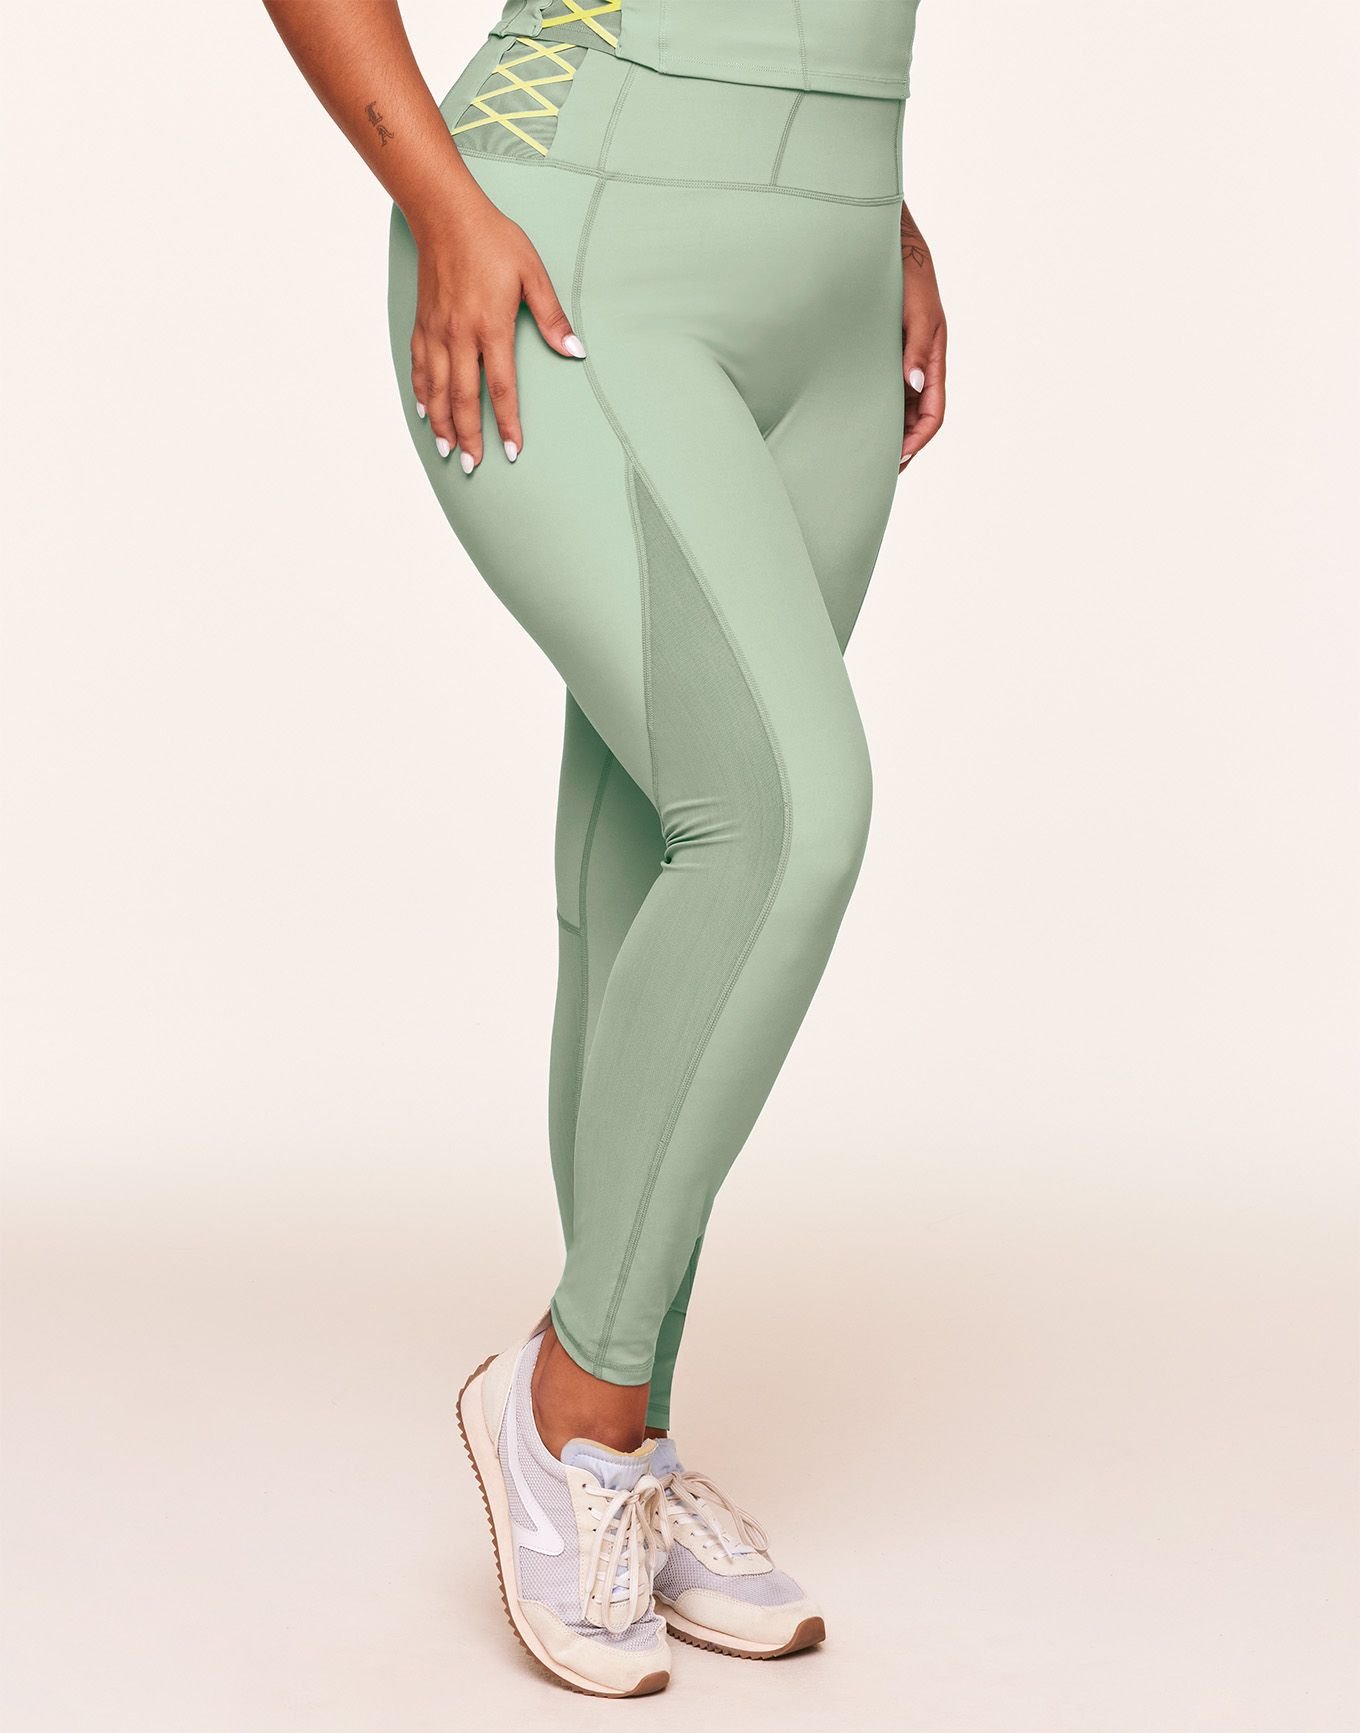 Extra High-Waisted Cloud+ 7/8 Jogger Leggings for Women